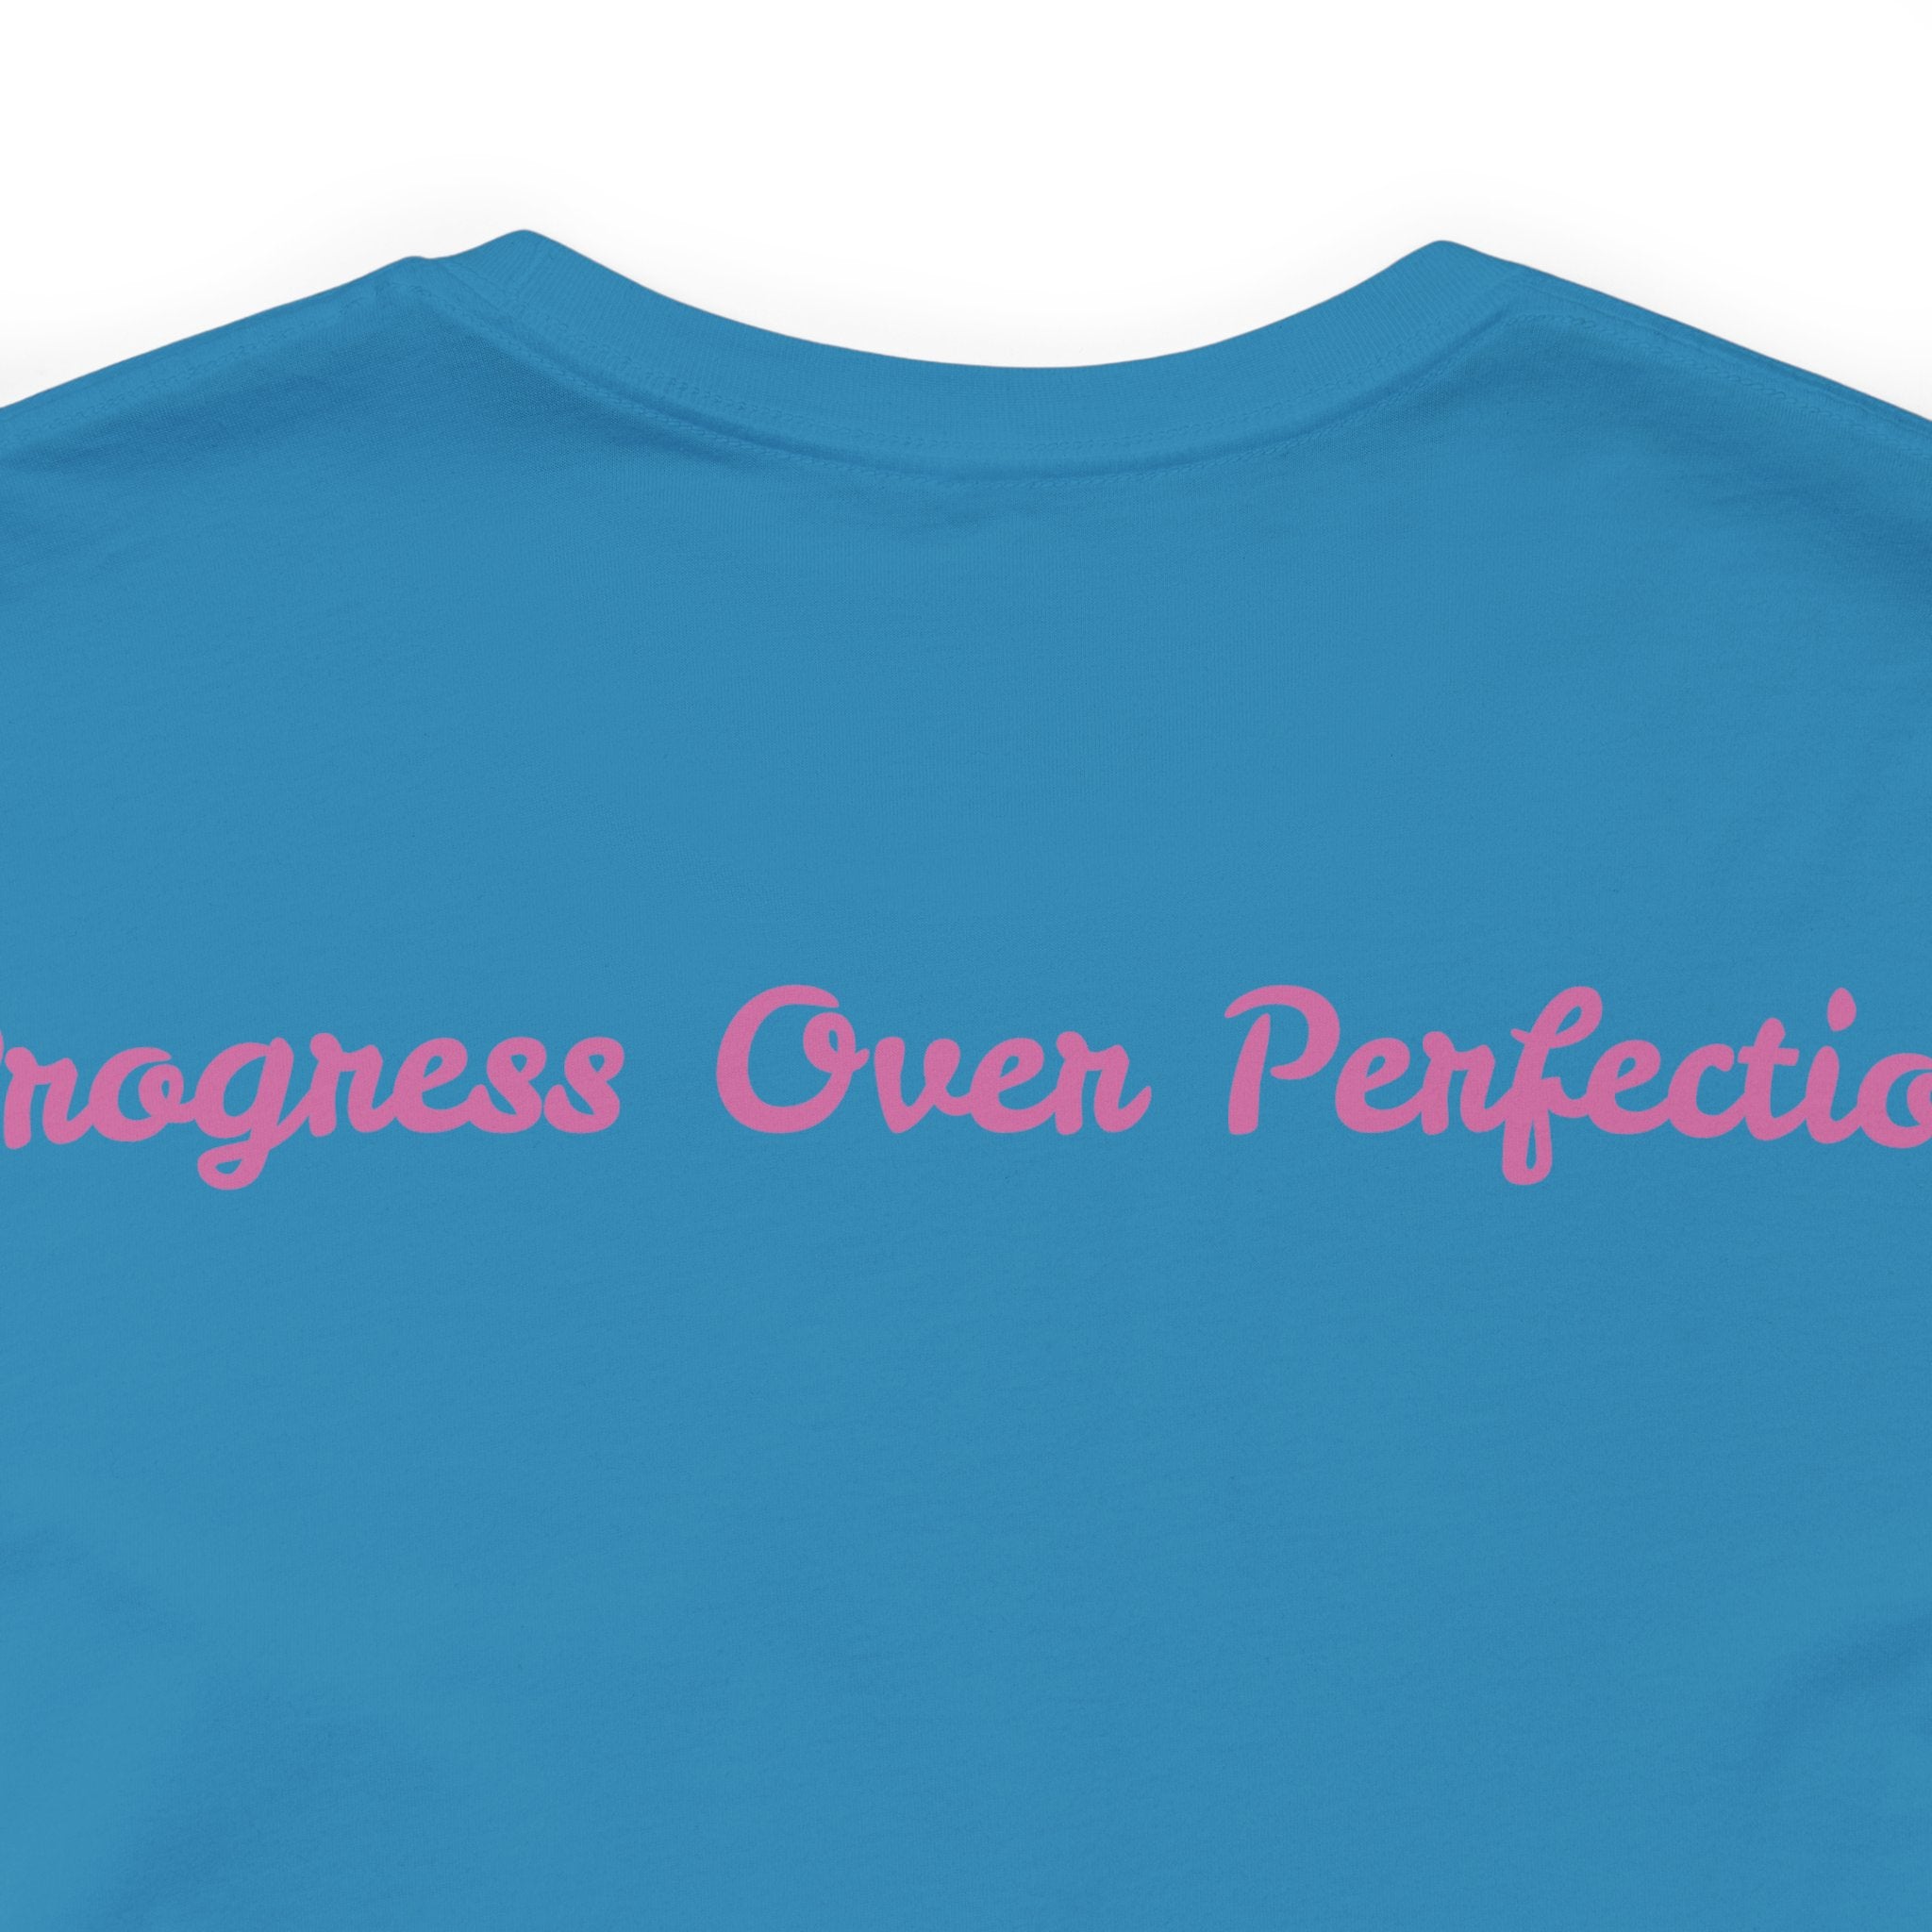 Progress Over Perfection Tee - Bella+Canvas 3001 Yellow Airlume Cotton Bella+Canvas 3001 Crew Neckline Jersey Short Sleeve Lightweight Fabric Mental Health Support Retail Fit Tear-away Label Tee Unisex Tee T-Shirt 4401650655731361956_2048 Printify